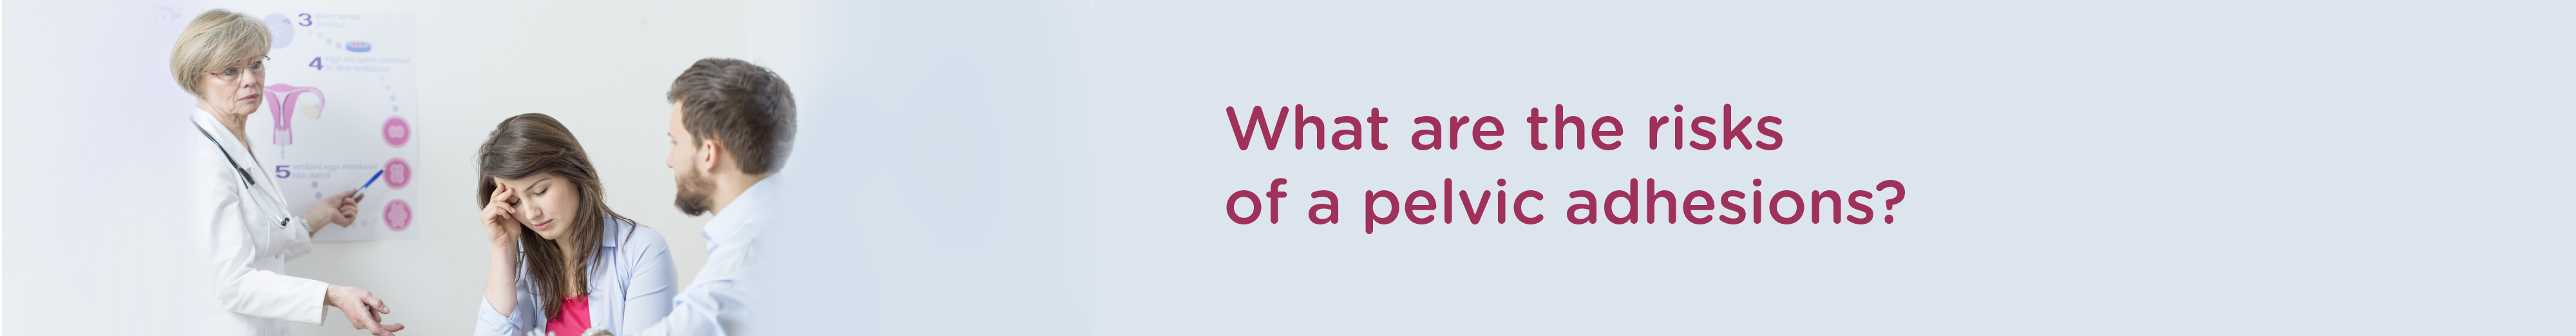 What are the Risks of a Pelvic Adhesions?